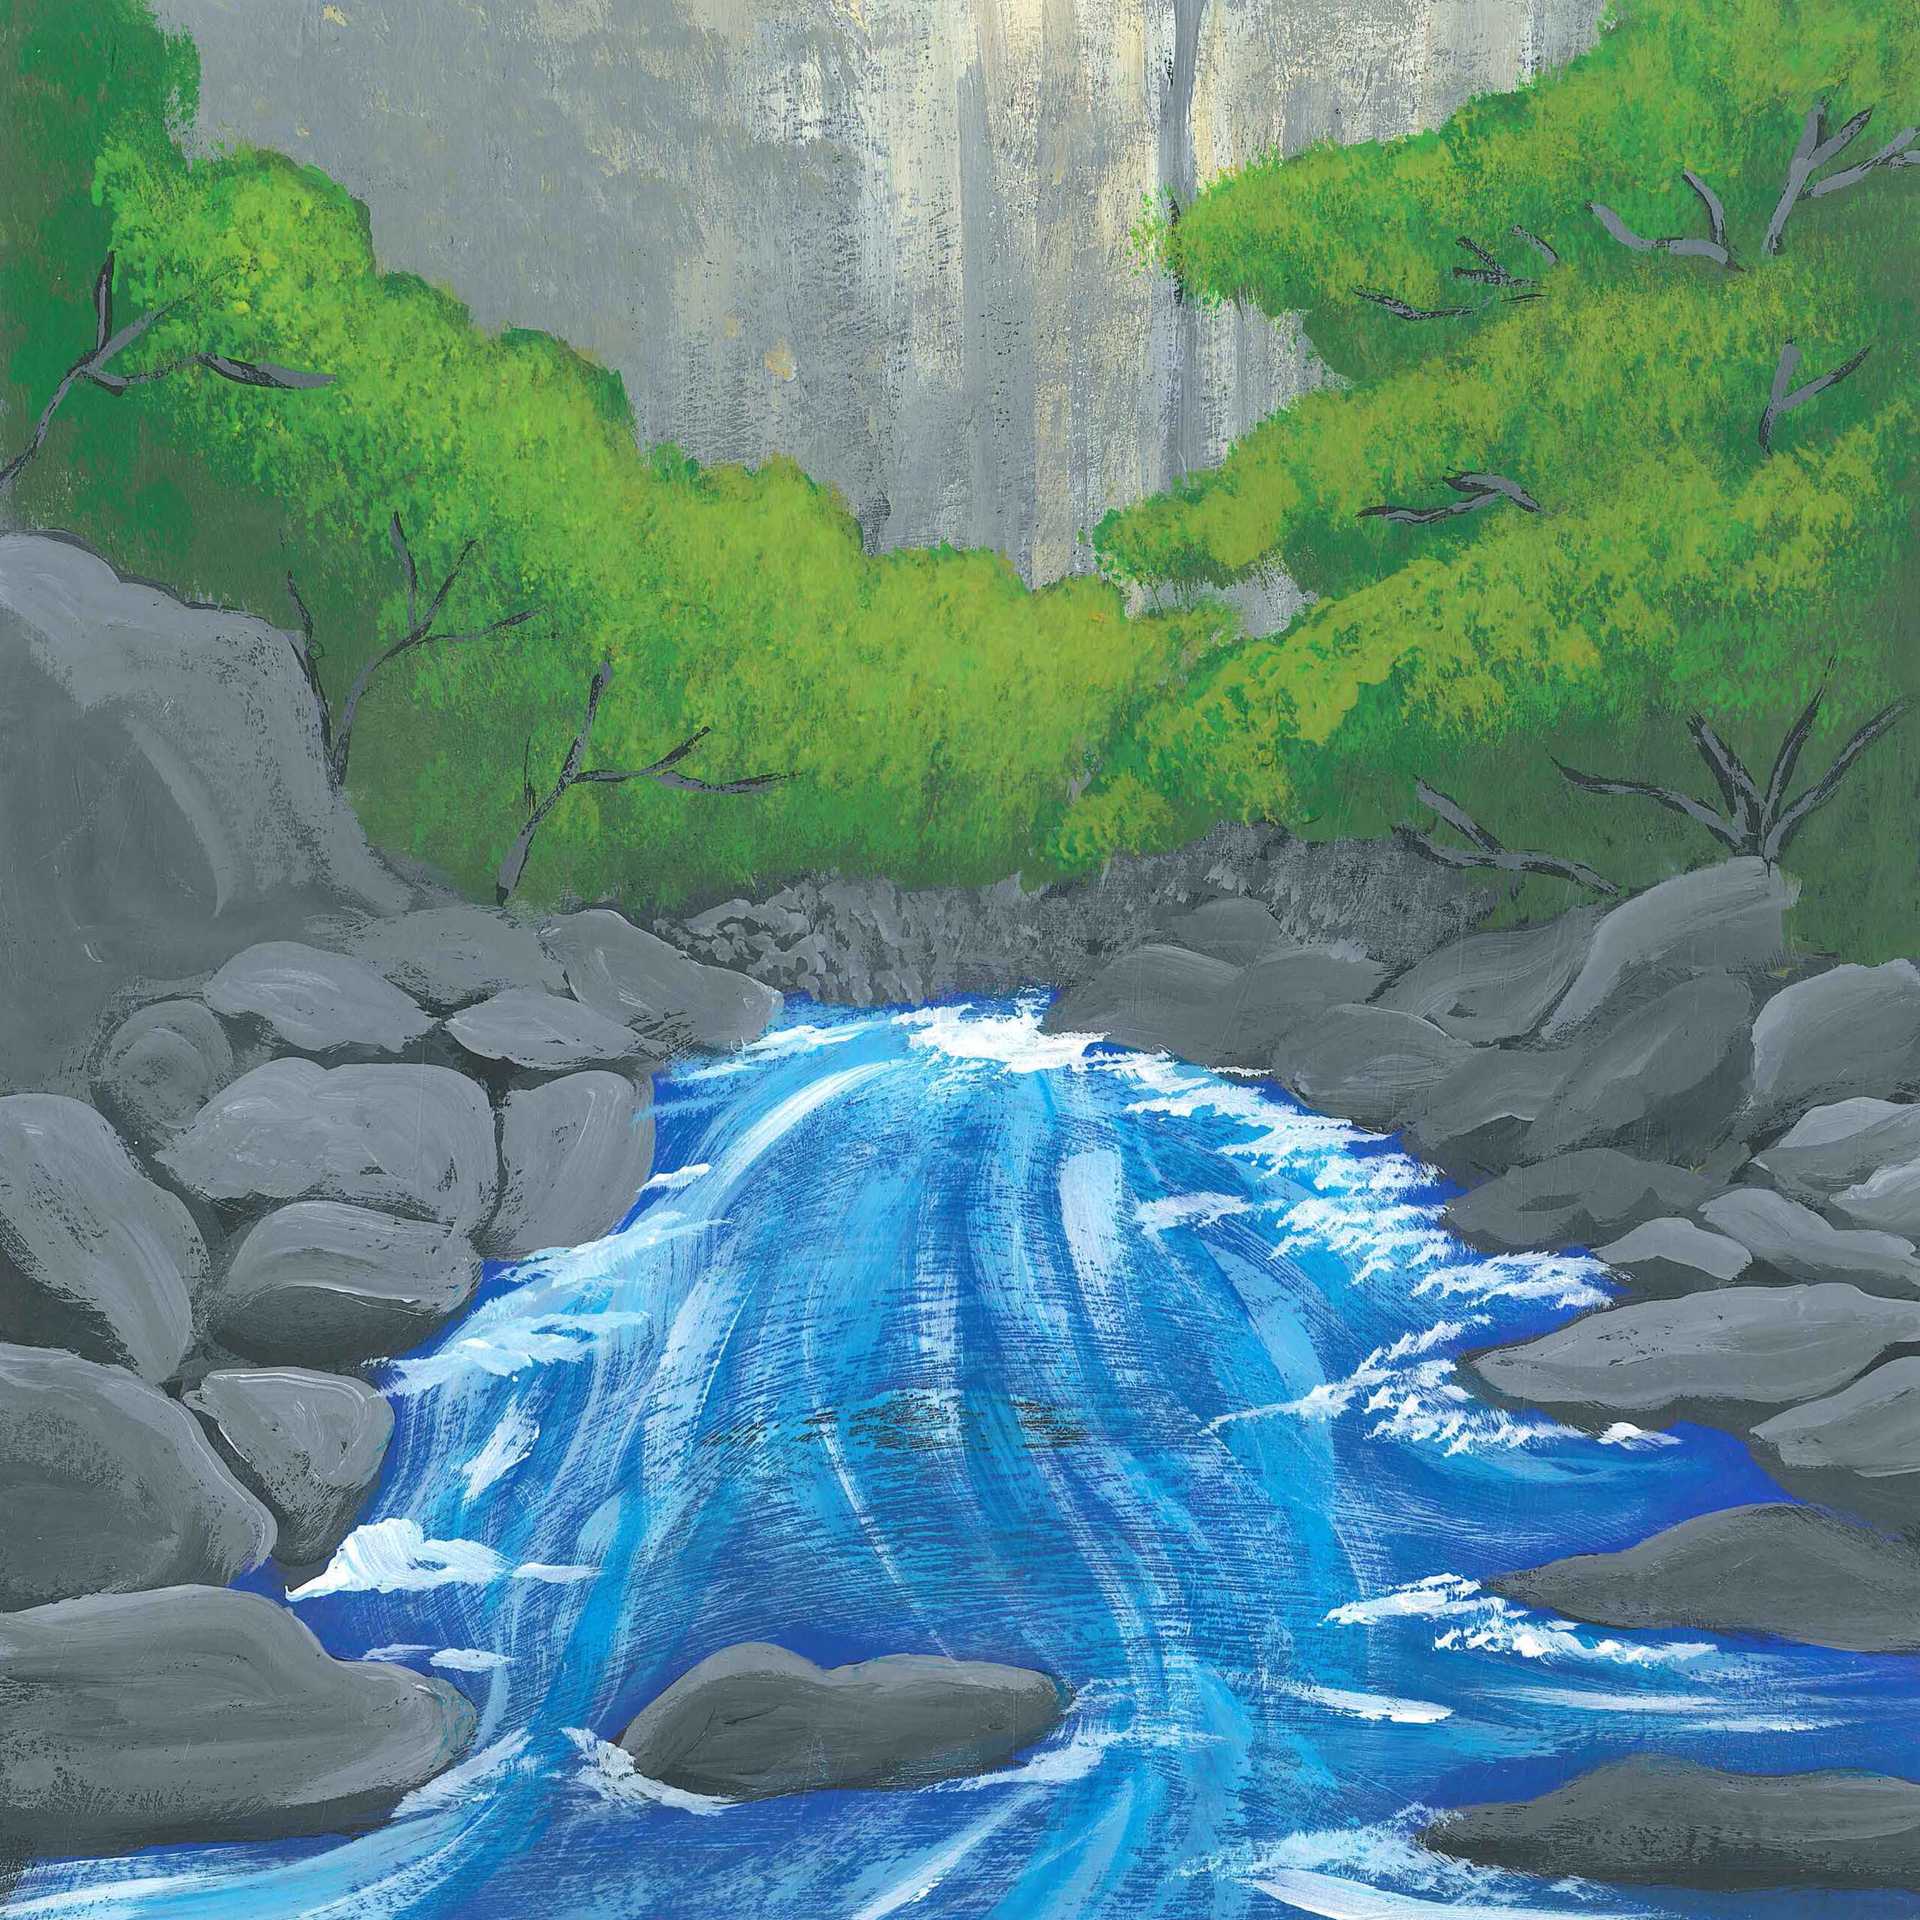 Waterfall in Forest - nature landscape painting - earth.fm